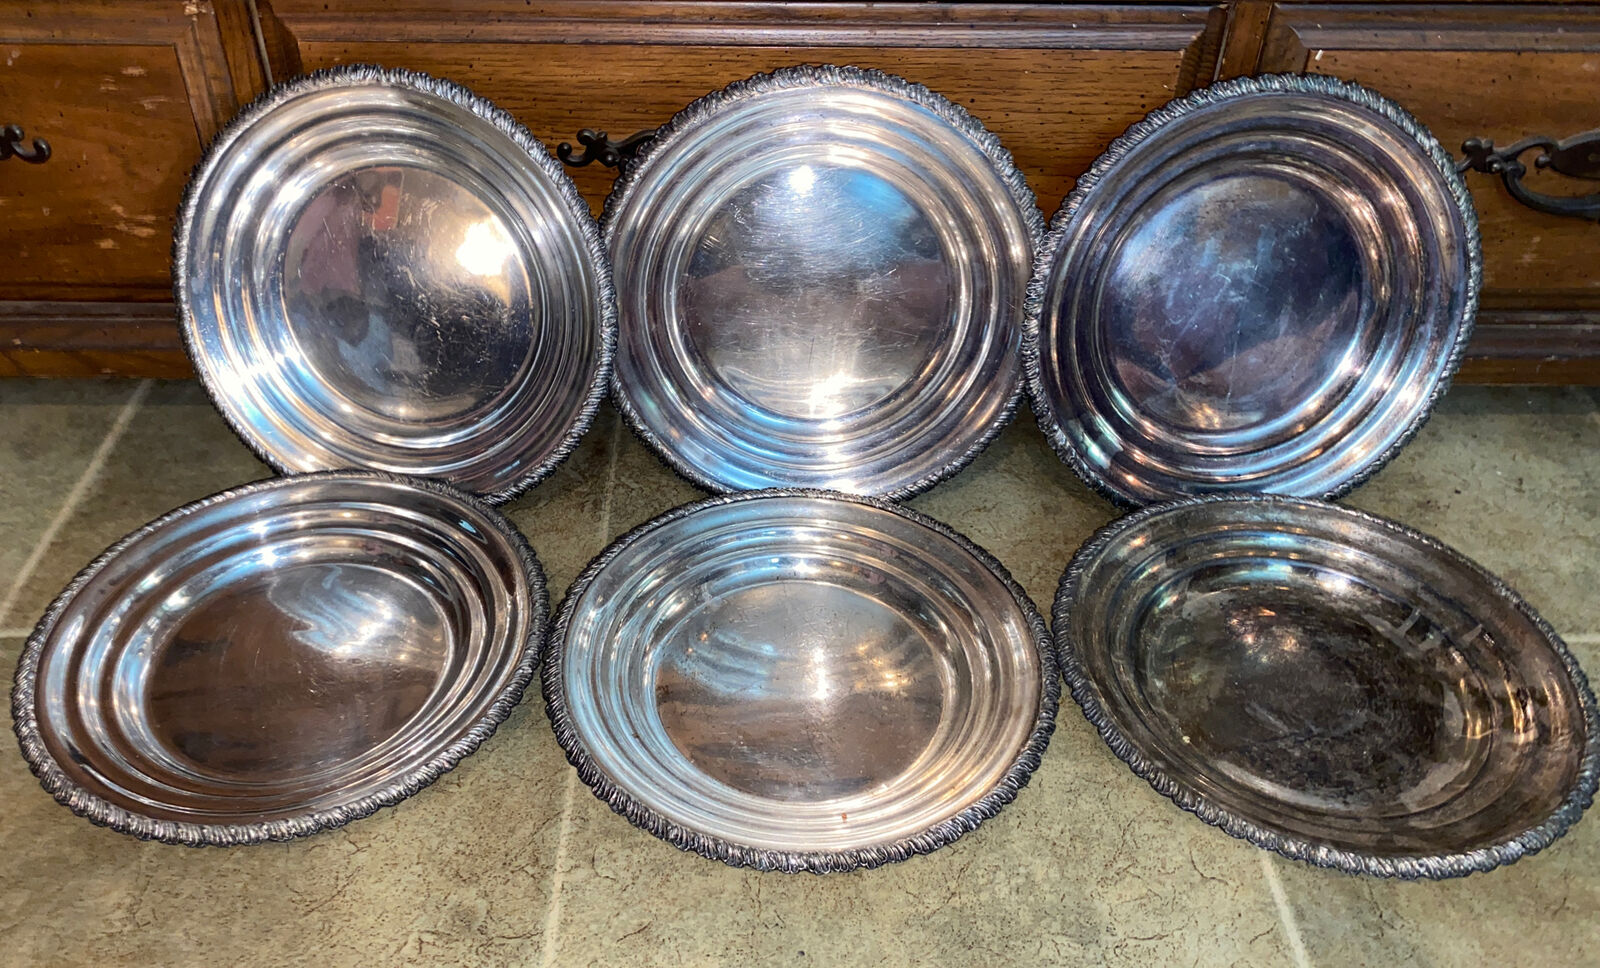 6 Wilcox Silverplate Co. Quadruple Plate 1394 Dinner Plates Offering Plates